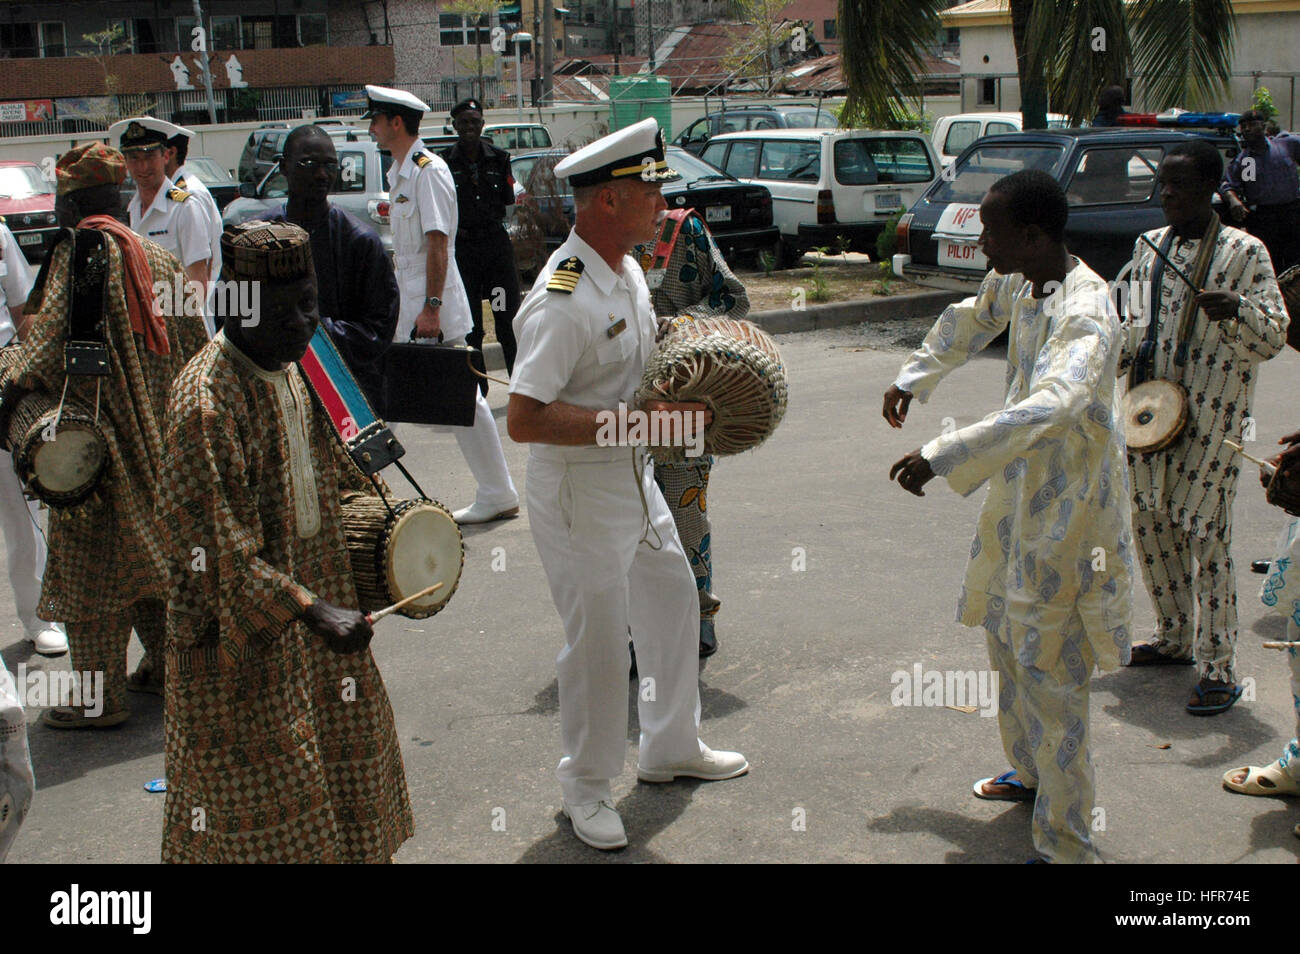 060602-N-8637R-002 Lagos, Nigeria (June 2, 2006) - Commander, Destroyer Squadron Six Zero (COMDESRON-60), Commodore Tom Rowden, dances with a drummer with the Oba of Lagos, Nigeria. The Oba is a spiritual leader in Nigerian culture and regarded as royalty.  Rowden is in Nigeria aboard the guided-missile destroyer USS Barry (DDG 52) representing the U.S. Navy during the Golden Jubilee of Nigeria's Navy, which marks the 50th anniversary of the Nigerian Navy. The port visit and participation in the Golden Jubilee is the latest in a series of engagements involving several Gulf of Guinea nations de Stock Photo